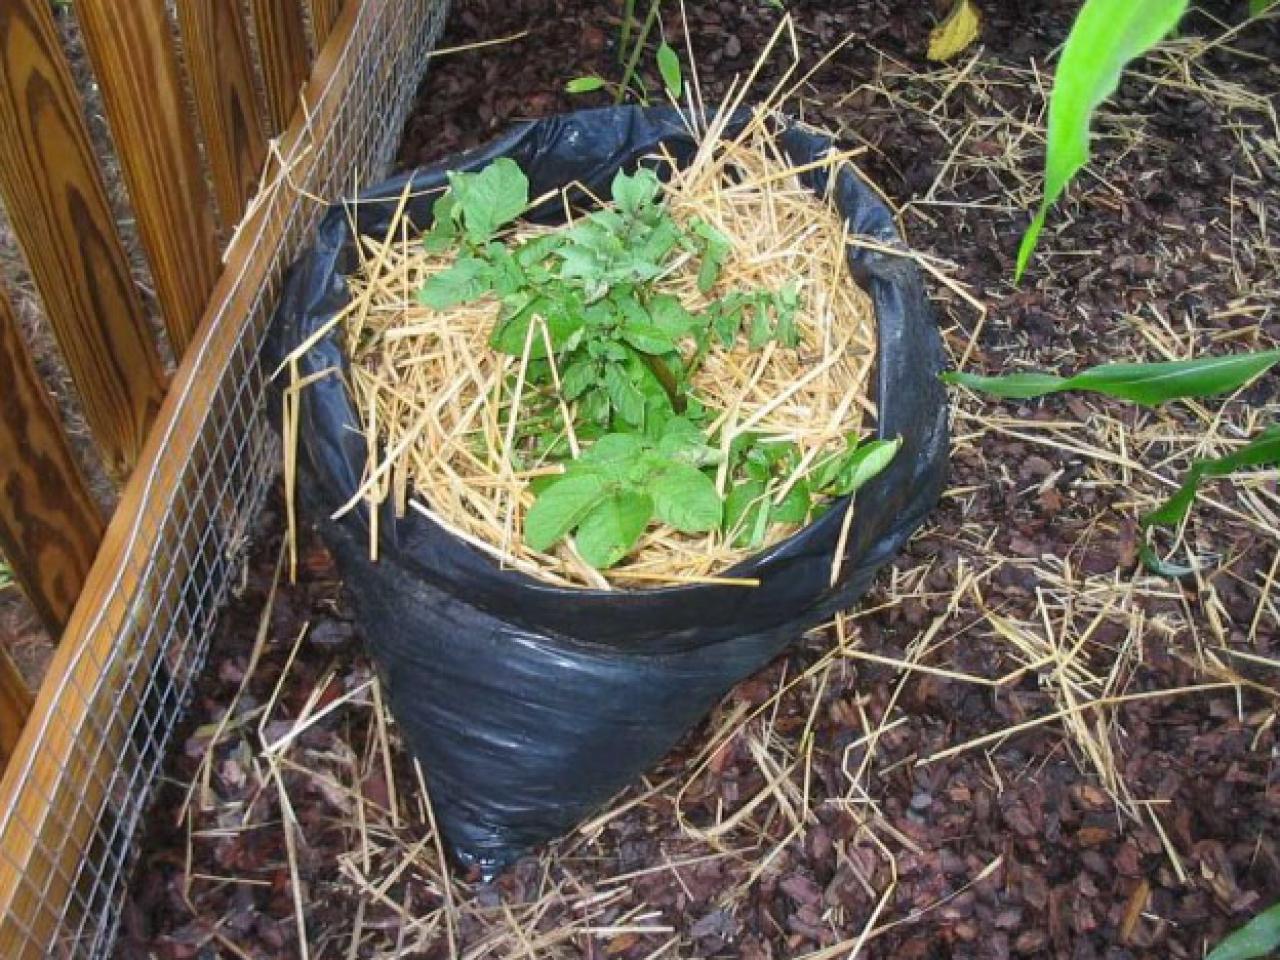 What are some tips on growing and harvesting potatoes?